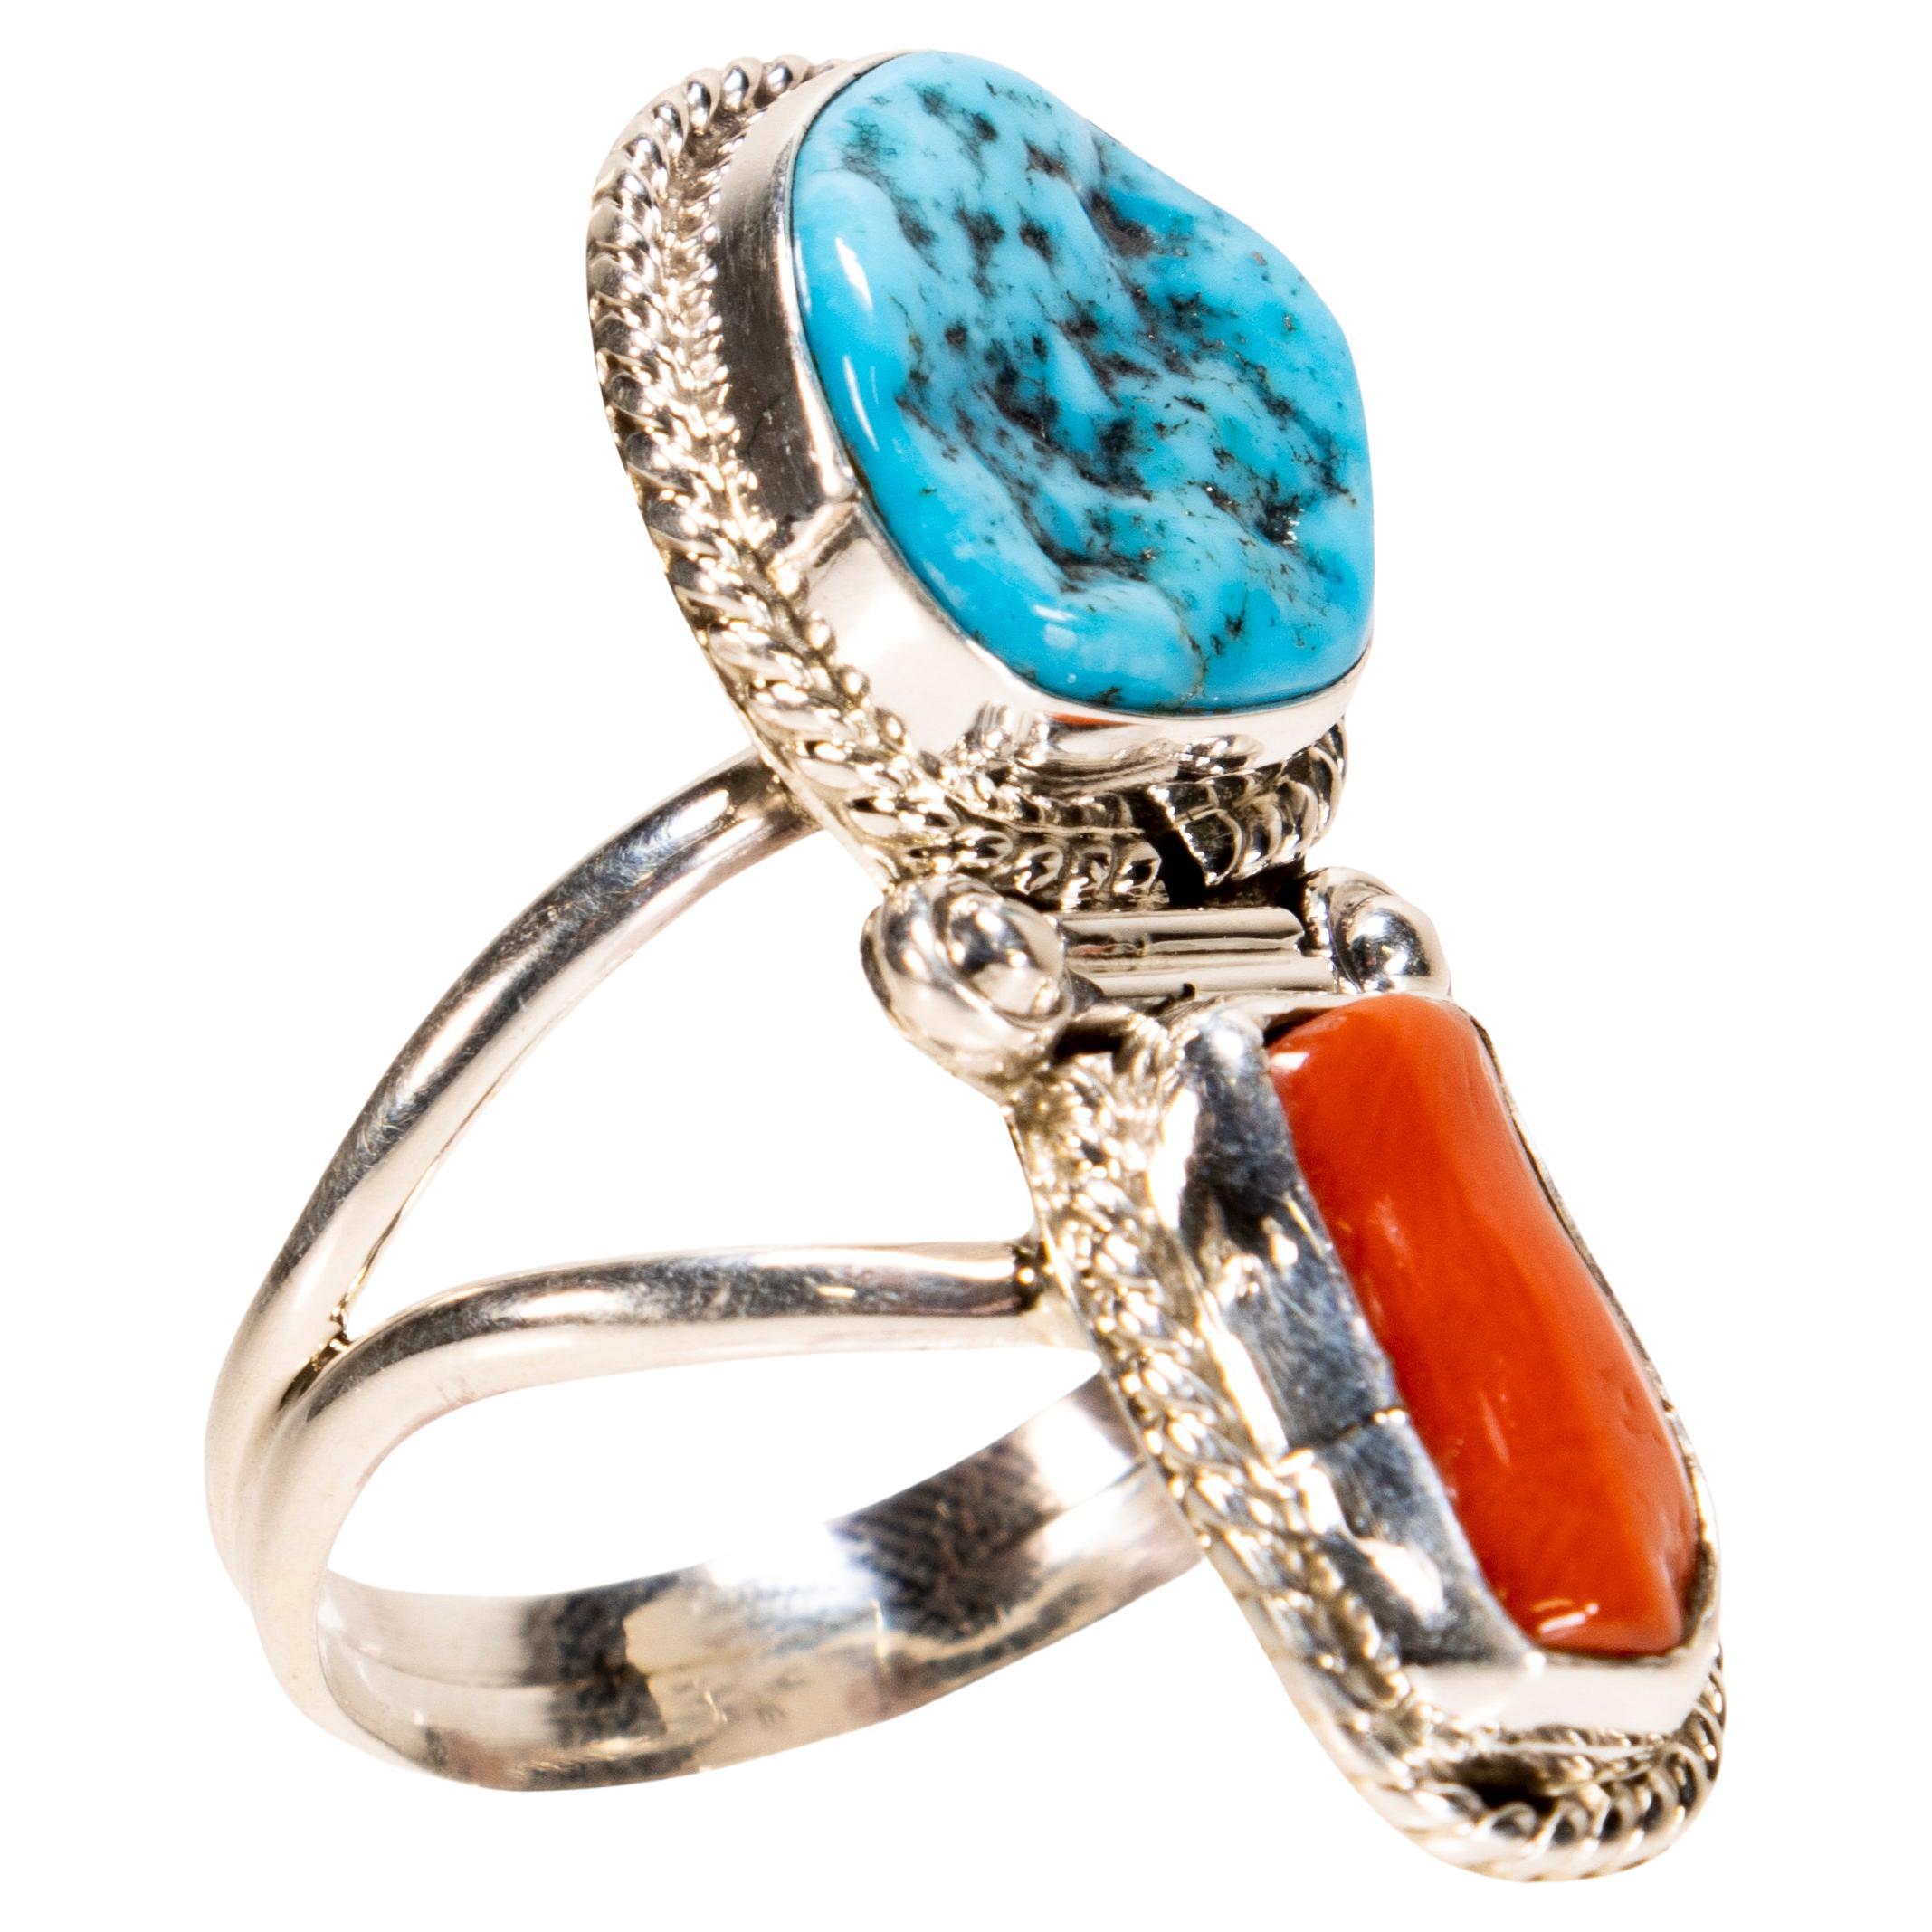 What is coral turquoise?